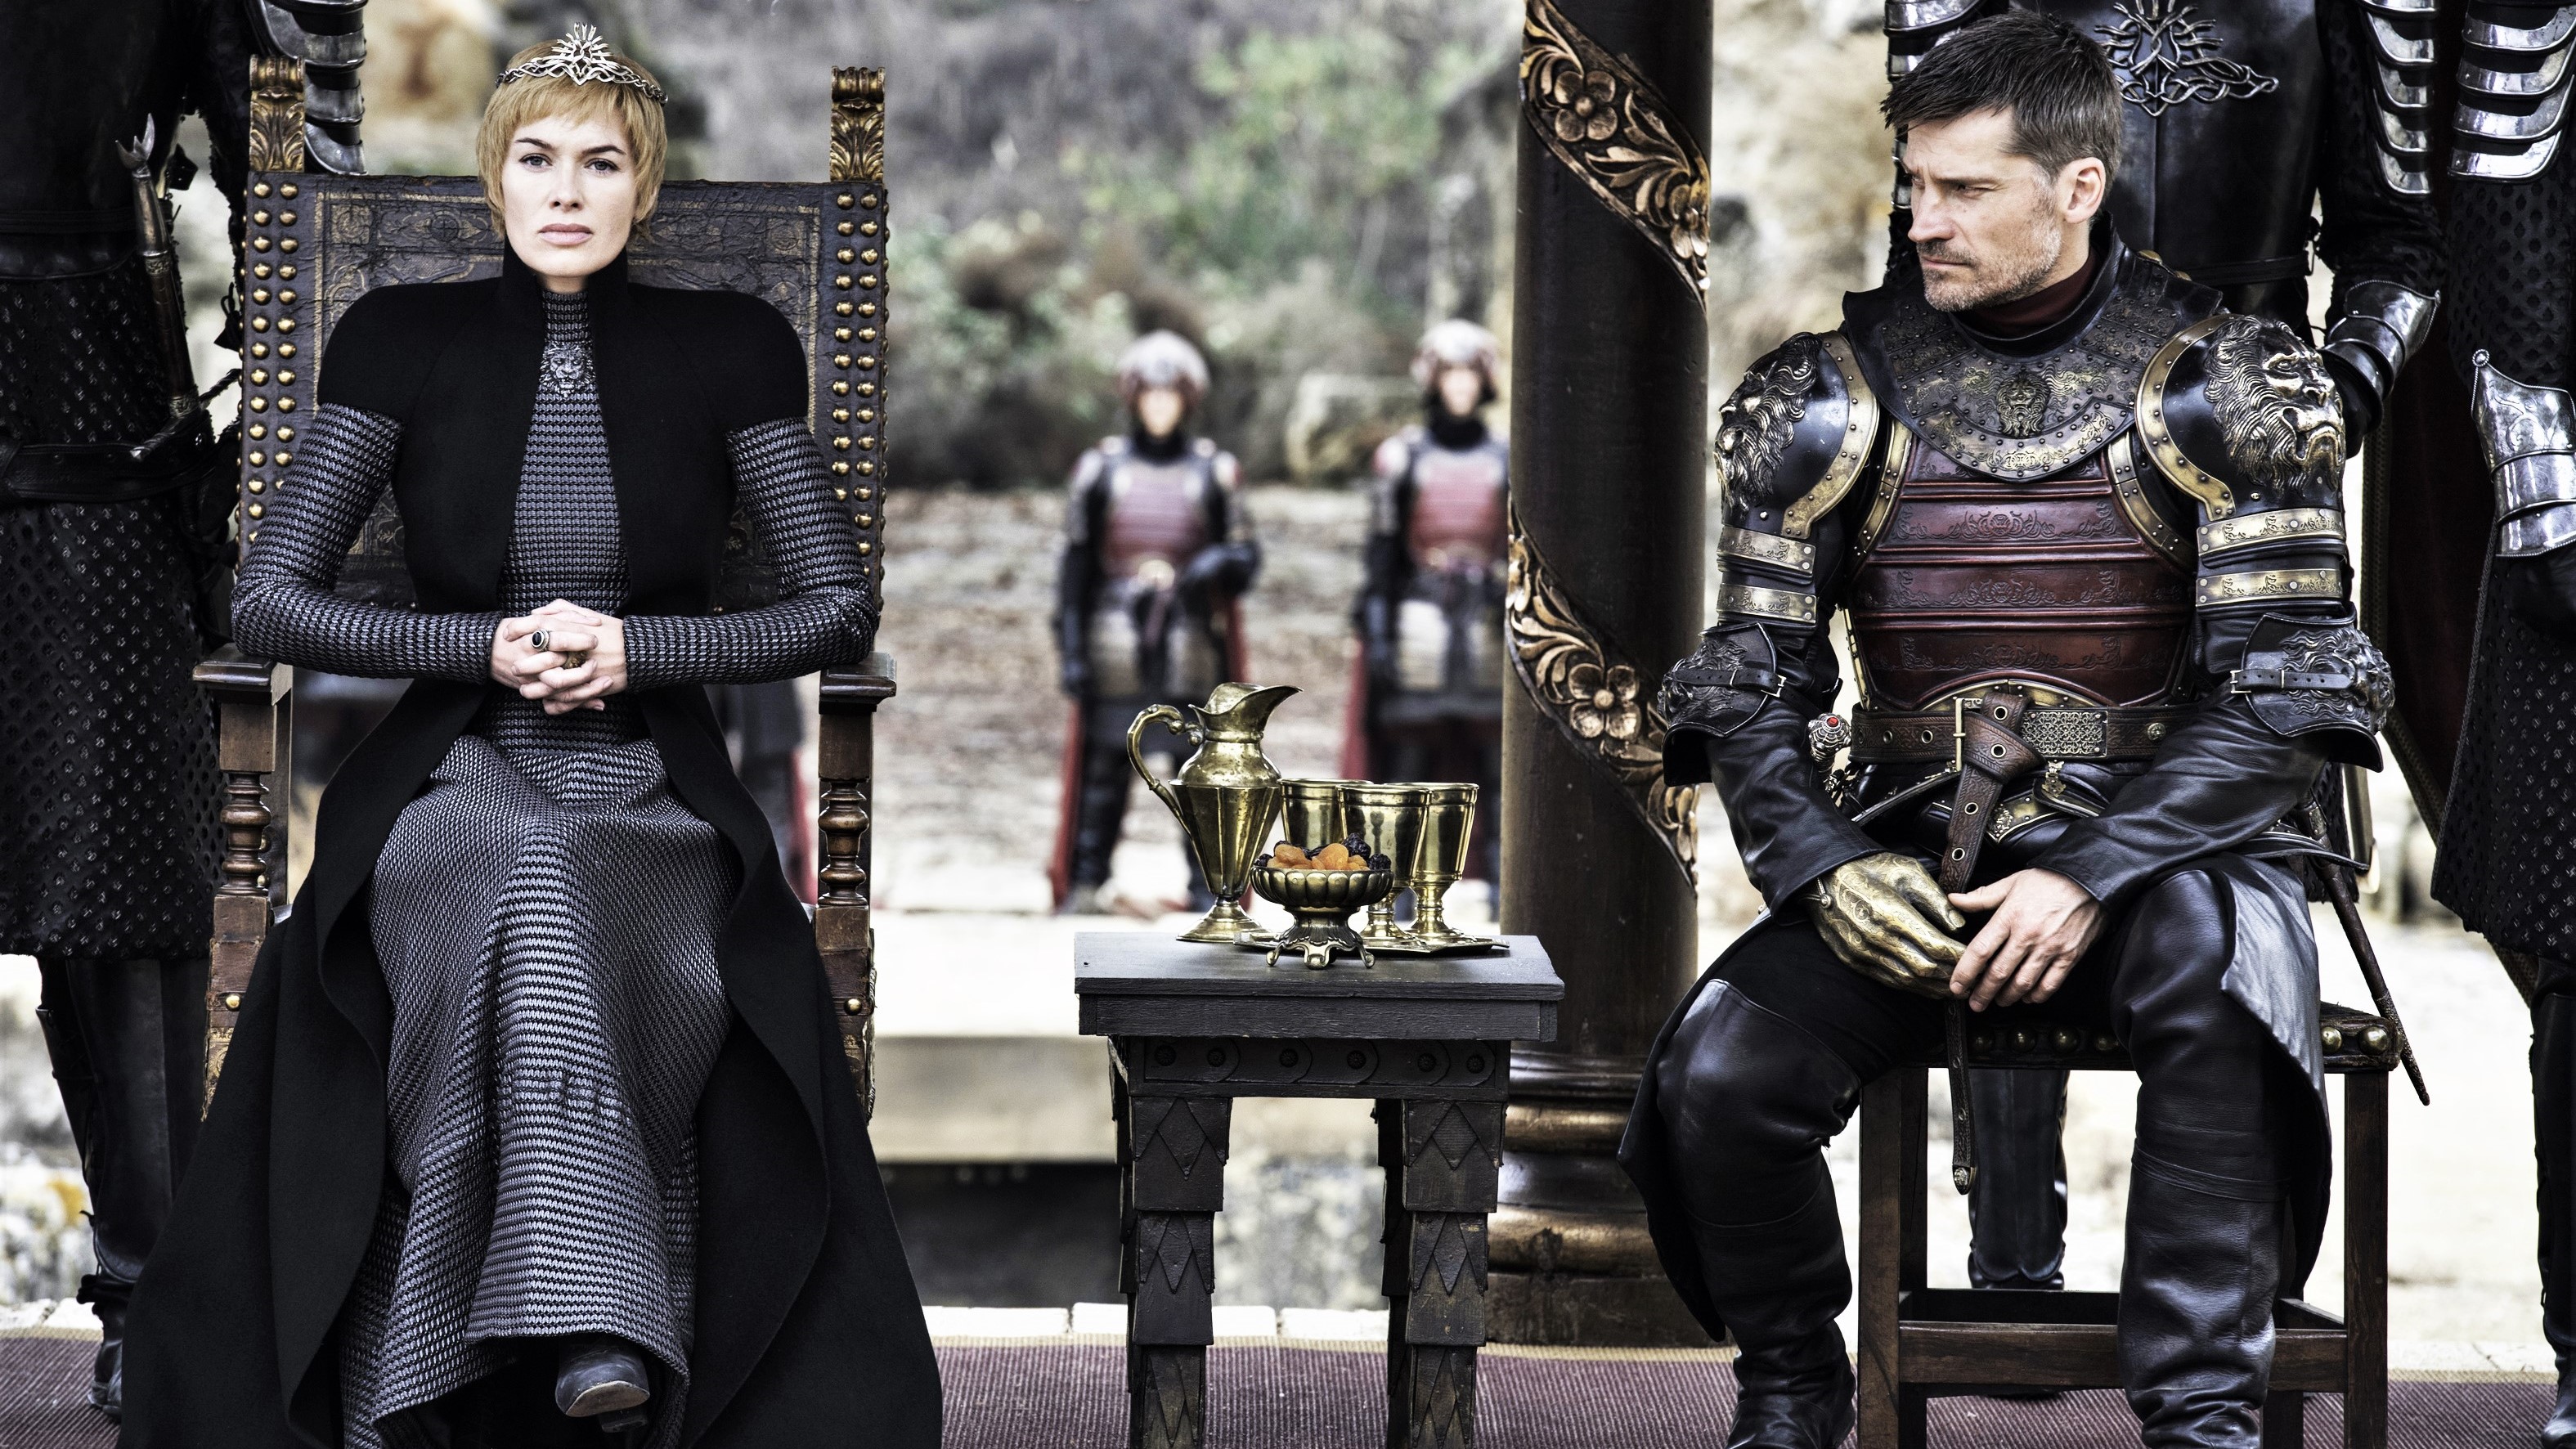 Which Game Of Thrones Character Are You? Cercei and Jaime Lannister